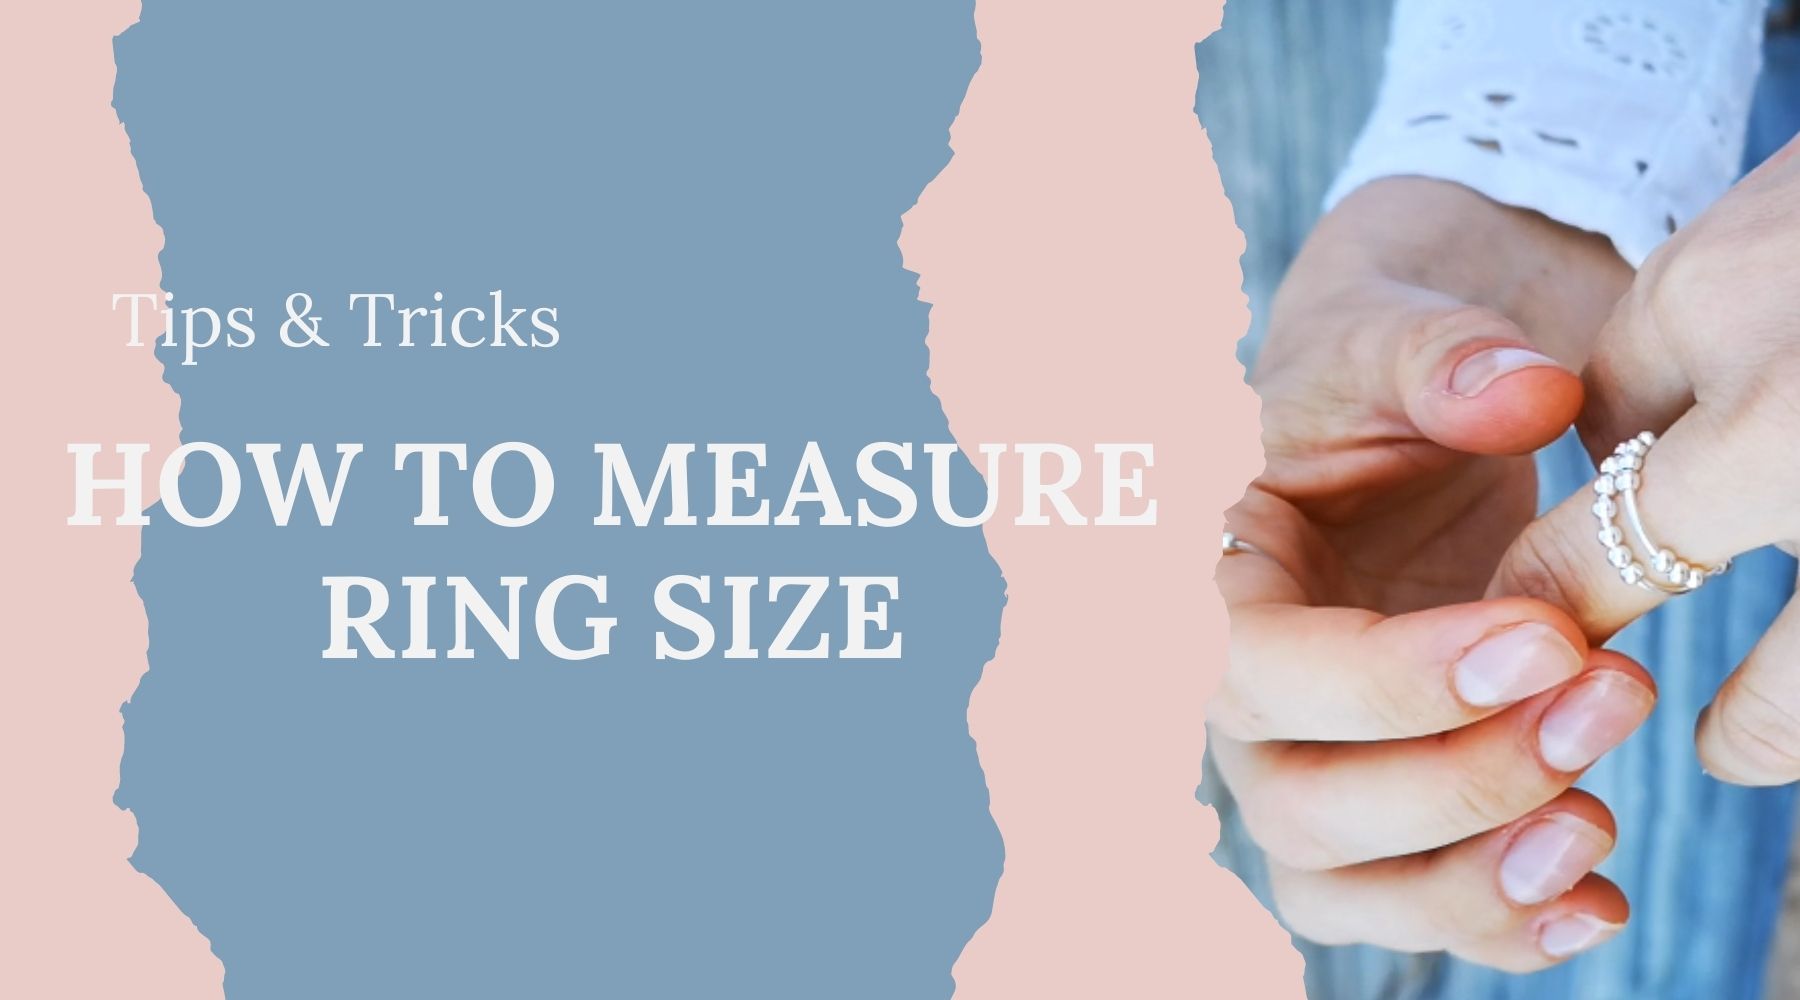 How to measure ring size at home